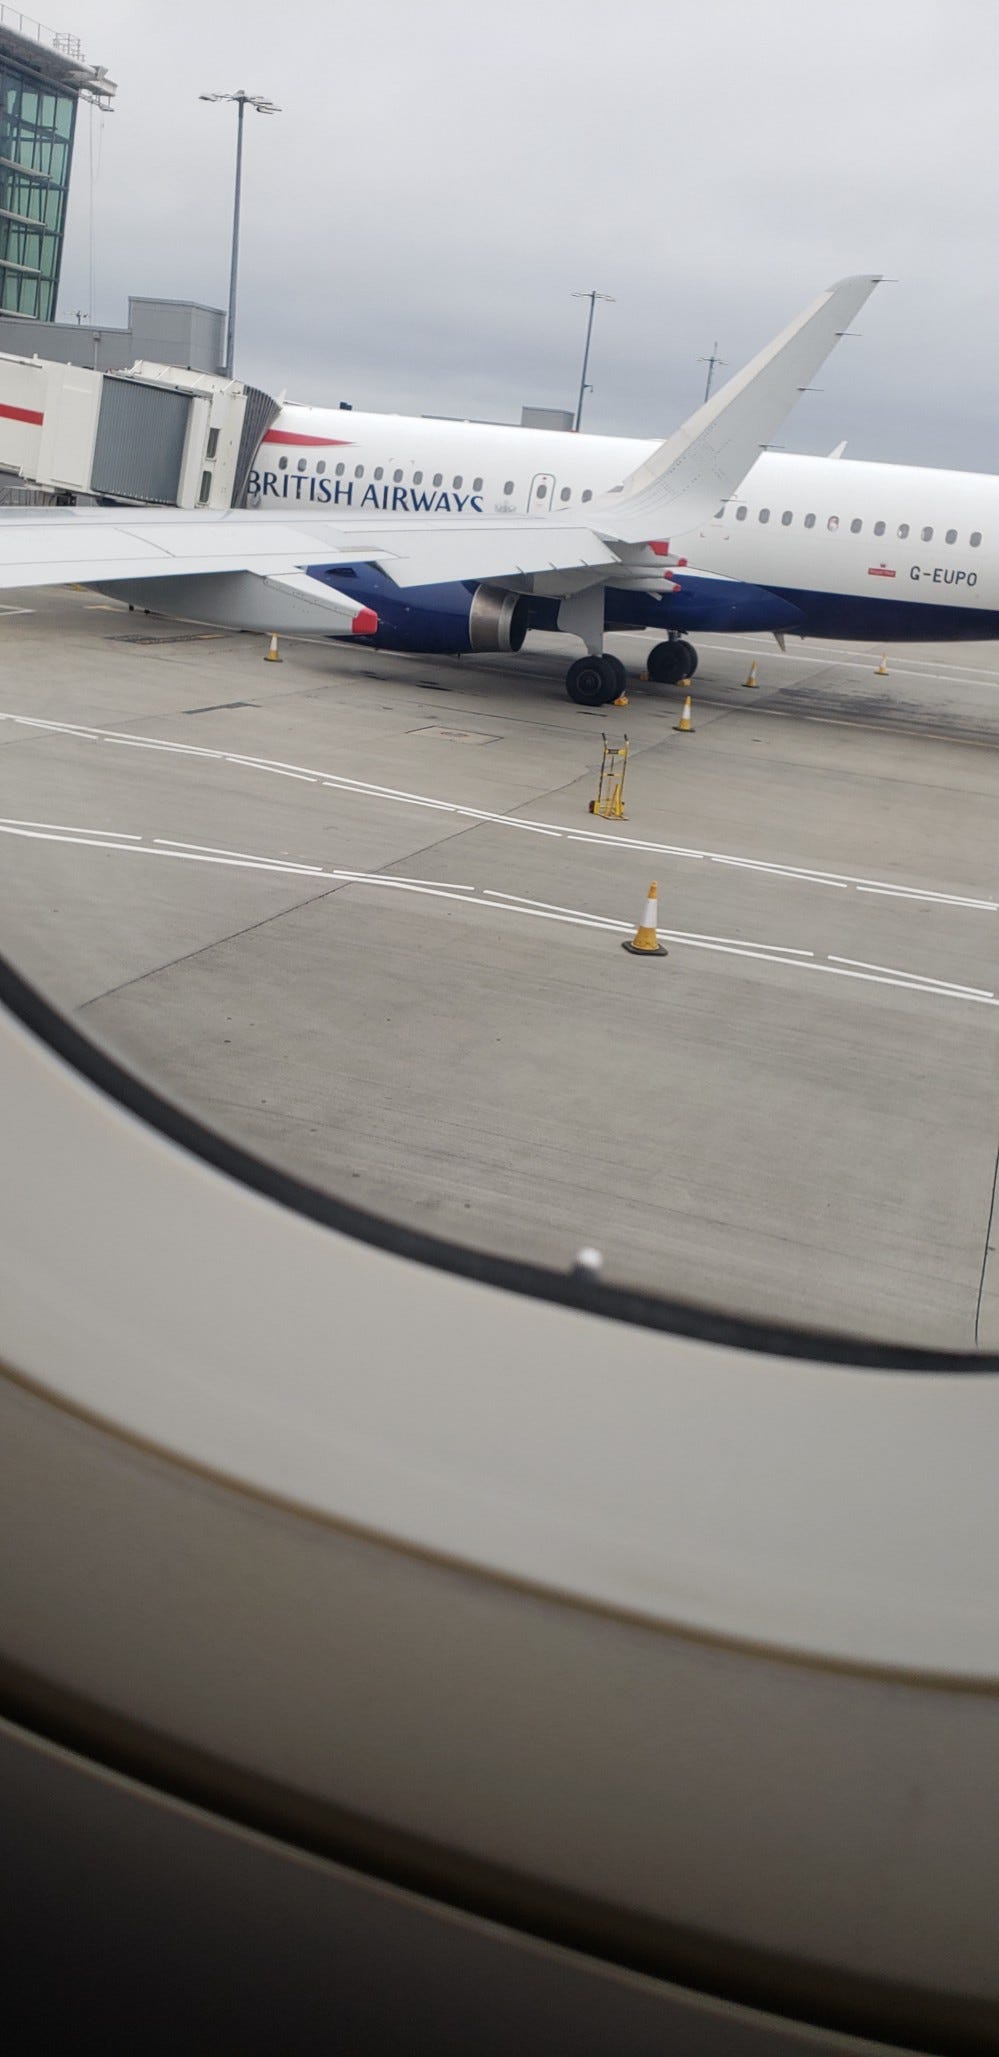 Window view of a British Airways airplane on the runway at Heathrow Airport Termianl 5